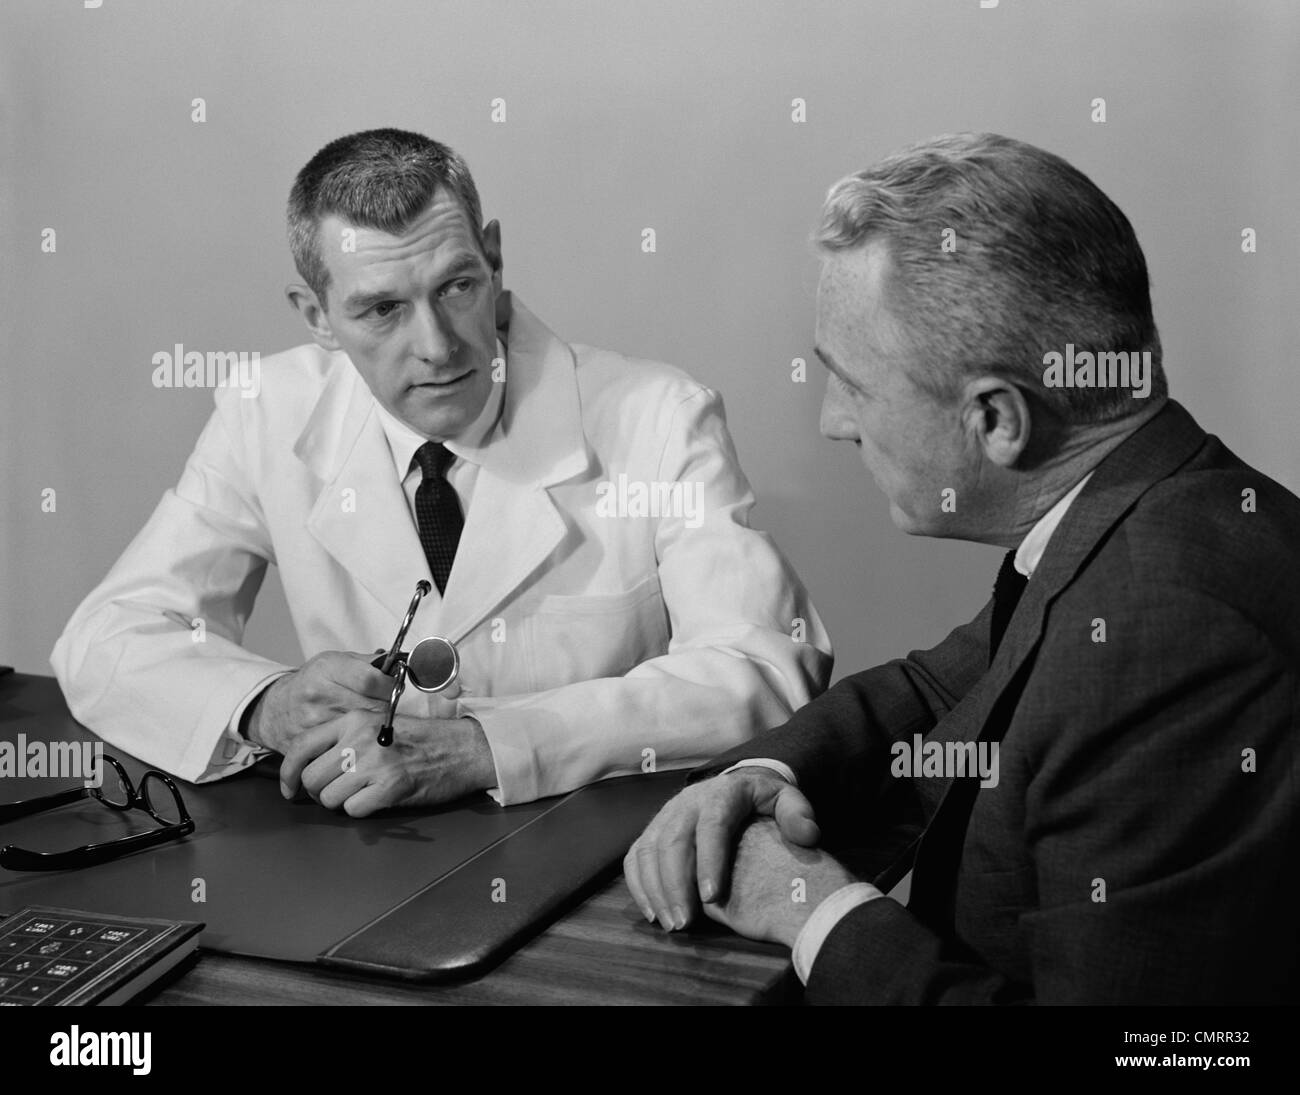 1950s MAN DOCTOR SITTING AT DESK TALKING TO MALE PATIENT Stock Photo